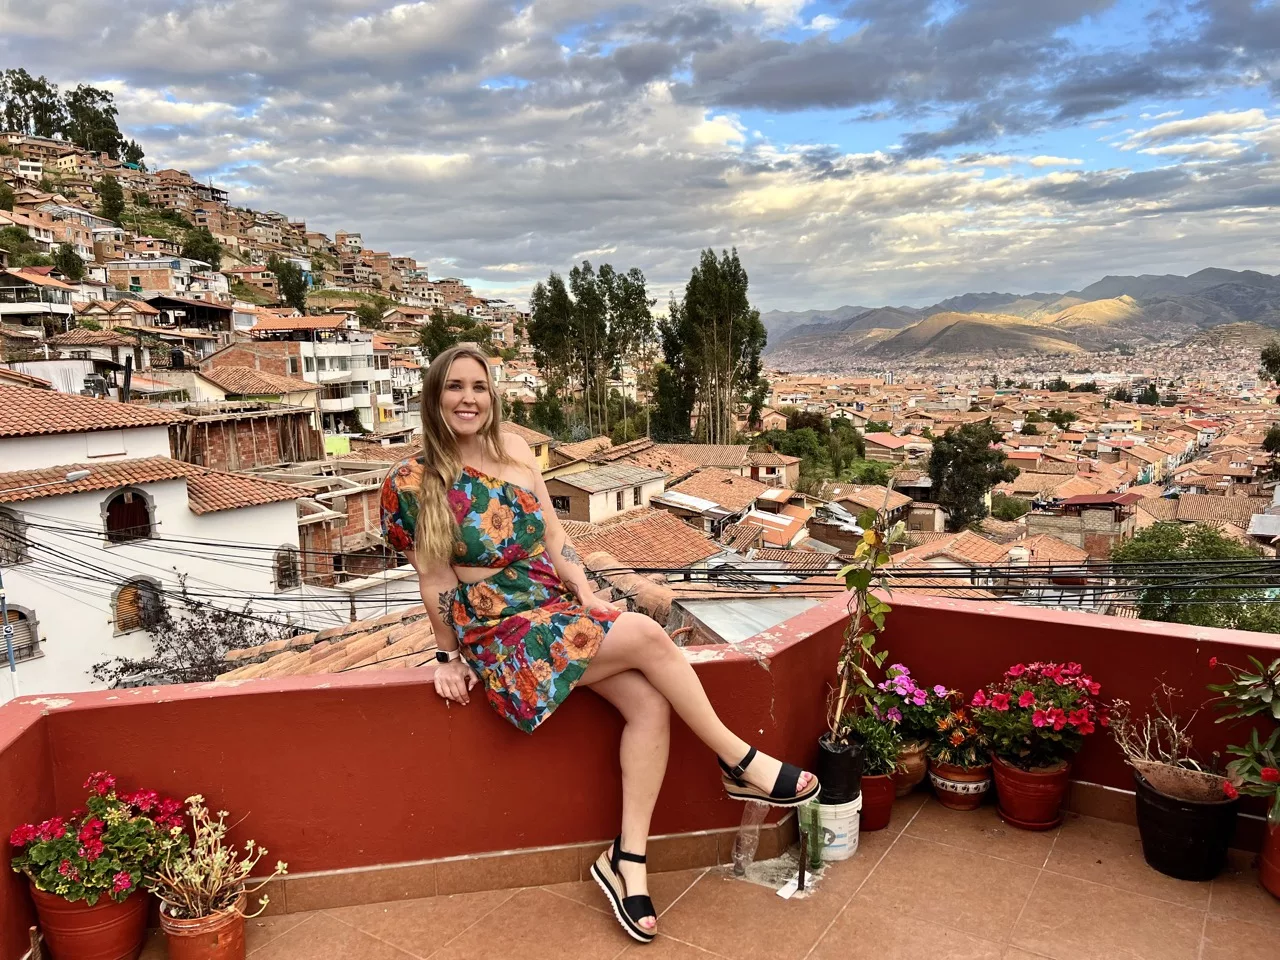 Erinn on the rooftop terrace of the Airbnb in Cusco.